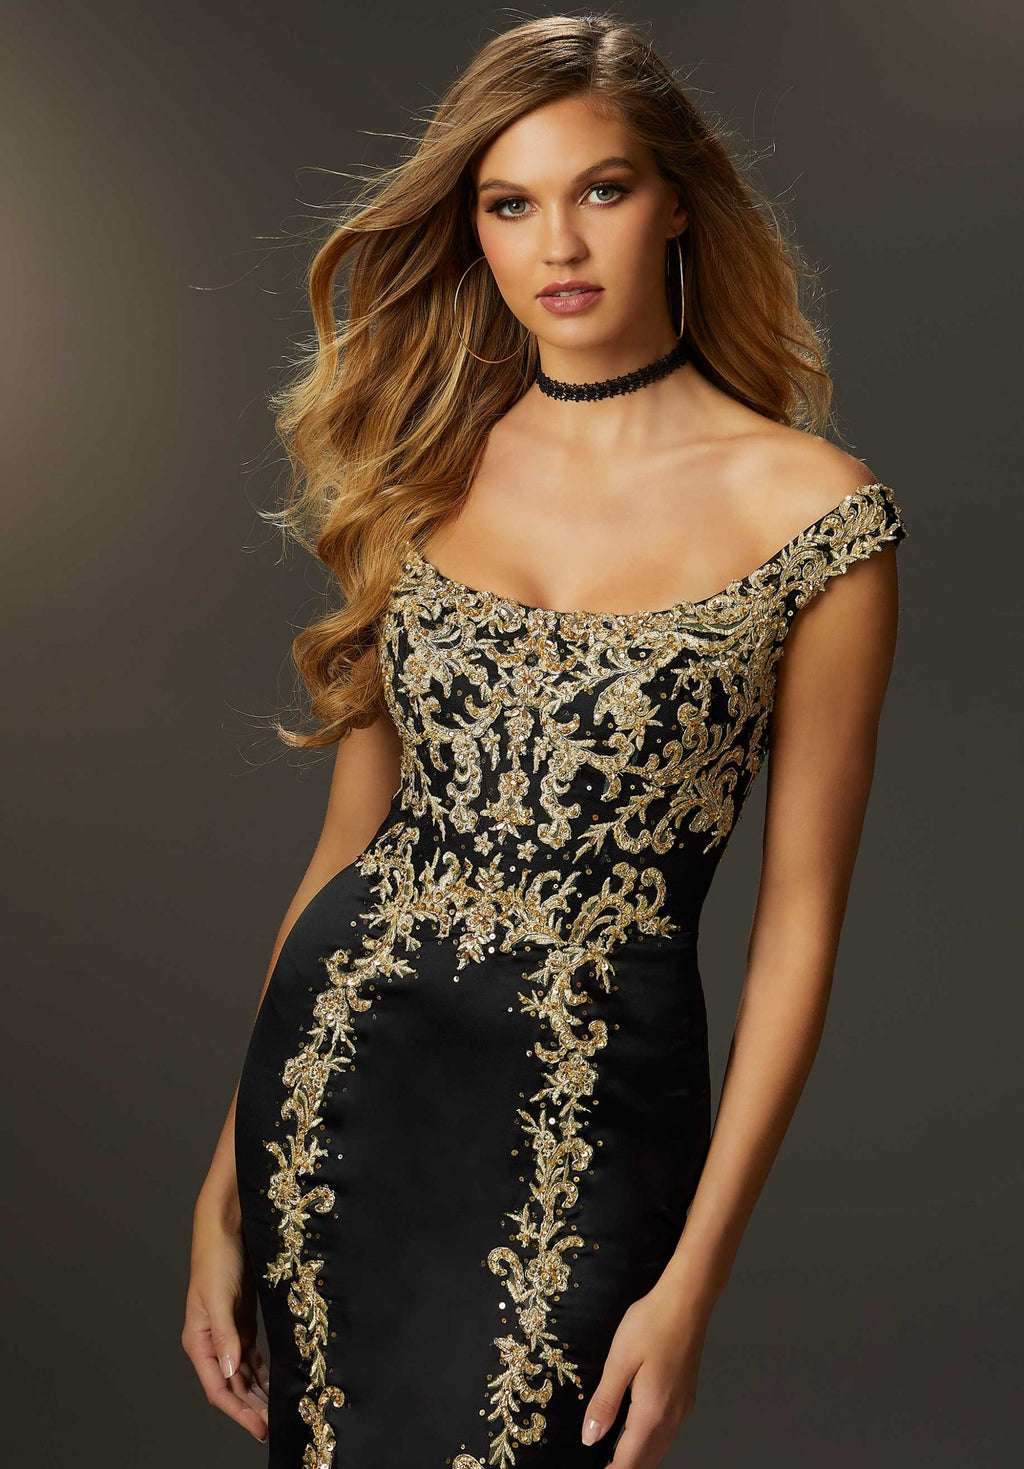 Regal and sophisticated, this mesmerizing Morilee dress 48012 will fascinate all in sight. Be the envy of all in this astonishing gown, an ideal choice for any social occasion. Showcasing an elegant off the shoulder neckline, this fitted gown shows off your curves perfectly. Lavish elaborate appliques and shimmering beads create an elaborate embroidery that adorns the bodice and gracefully transition onto the fit an flare skirt.